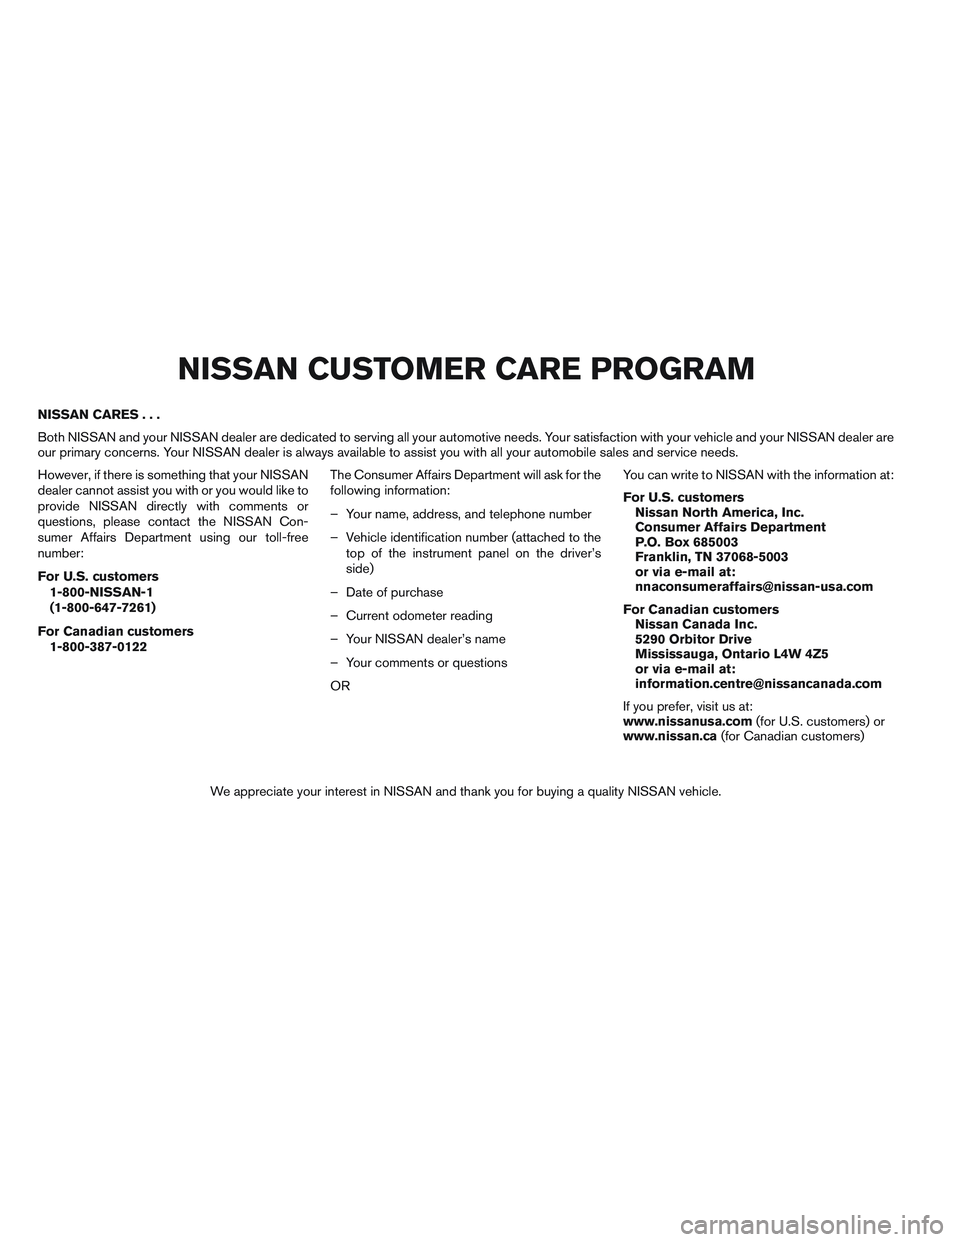 NISSAN ALTIMA SEDAN 2014  Owners Manual NISSAN CARES...
Both NISSAN and your NISSAN dealer are dedicated to serving all your automotive needs. Your satisfaction with your vehicle and your NISSAN dealer are
our primary concerns. Your NISSAN 